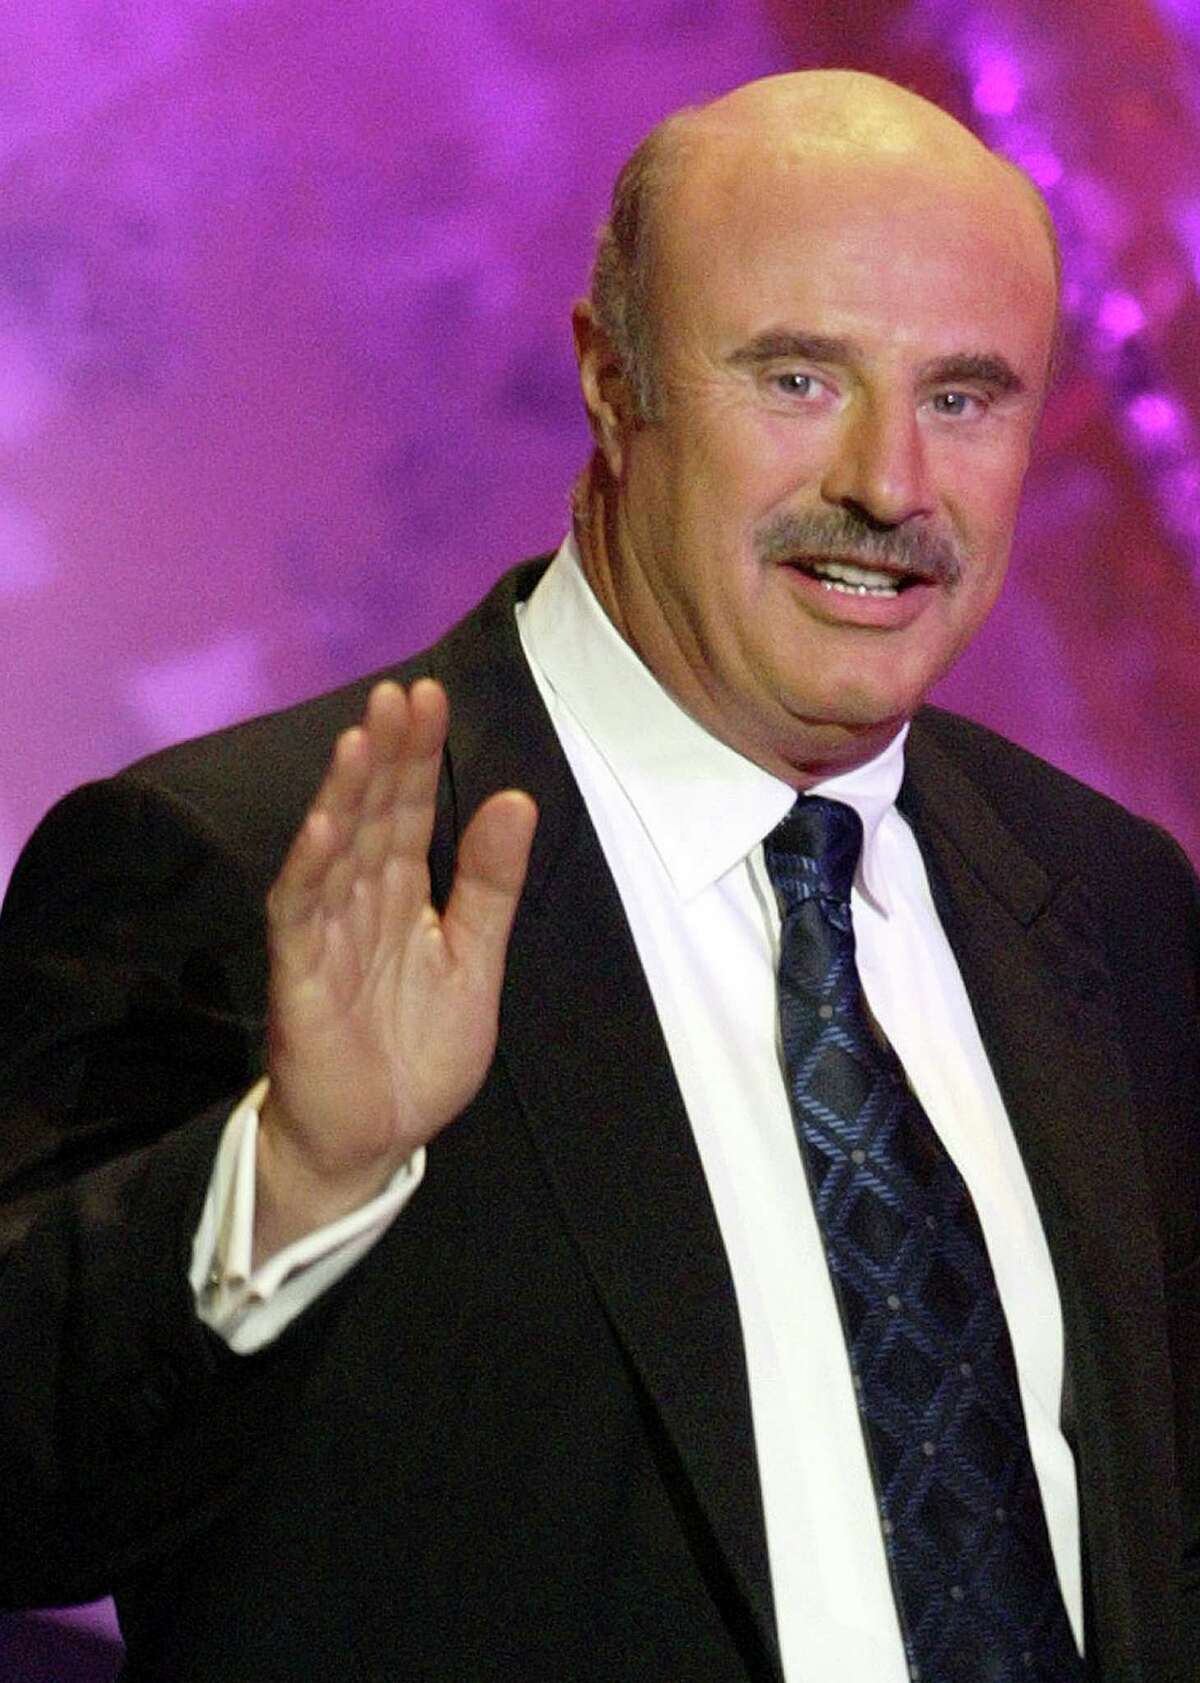 4. Dr. Phil McGraw - $88 million The TV personality's income is a mixture of his eponymous daytime show, being executive producer of "The Doctors," the Doctor On Demand app, and he shills for the AARP and AstraZeneca. Source: Forbes